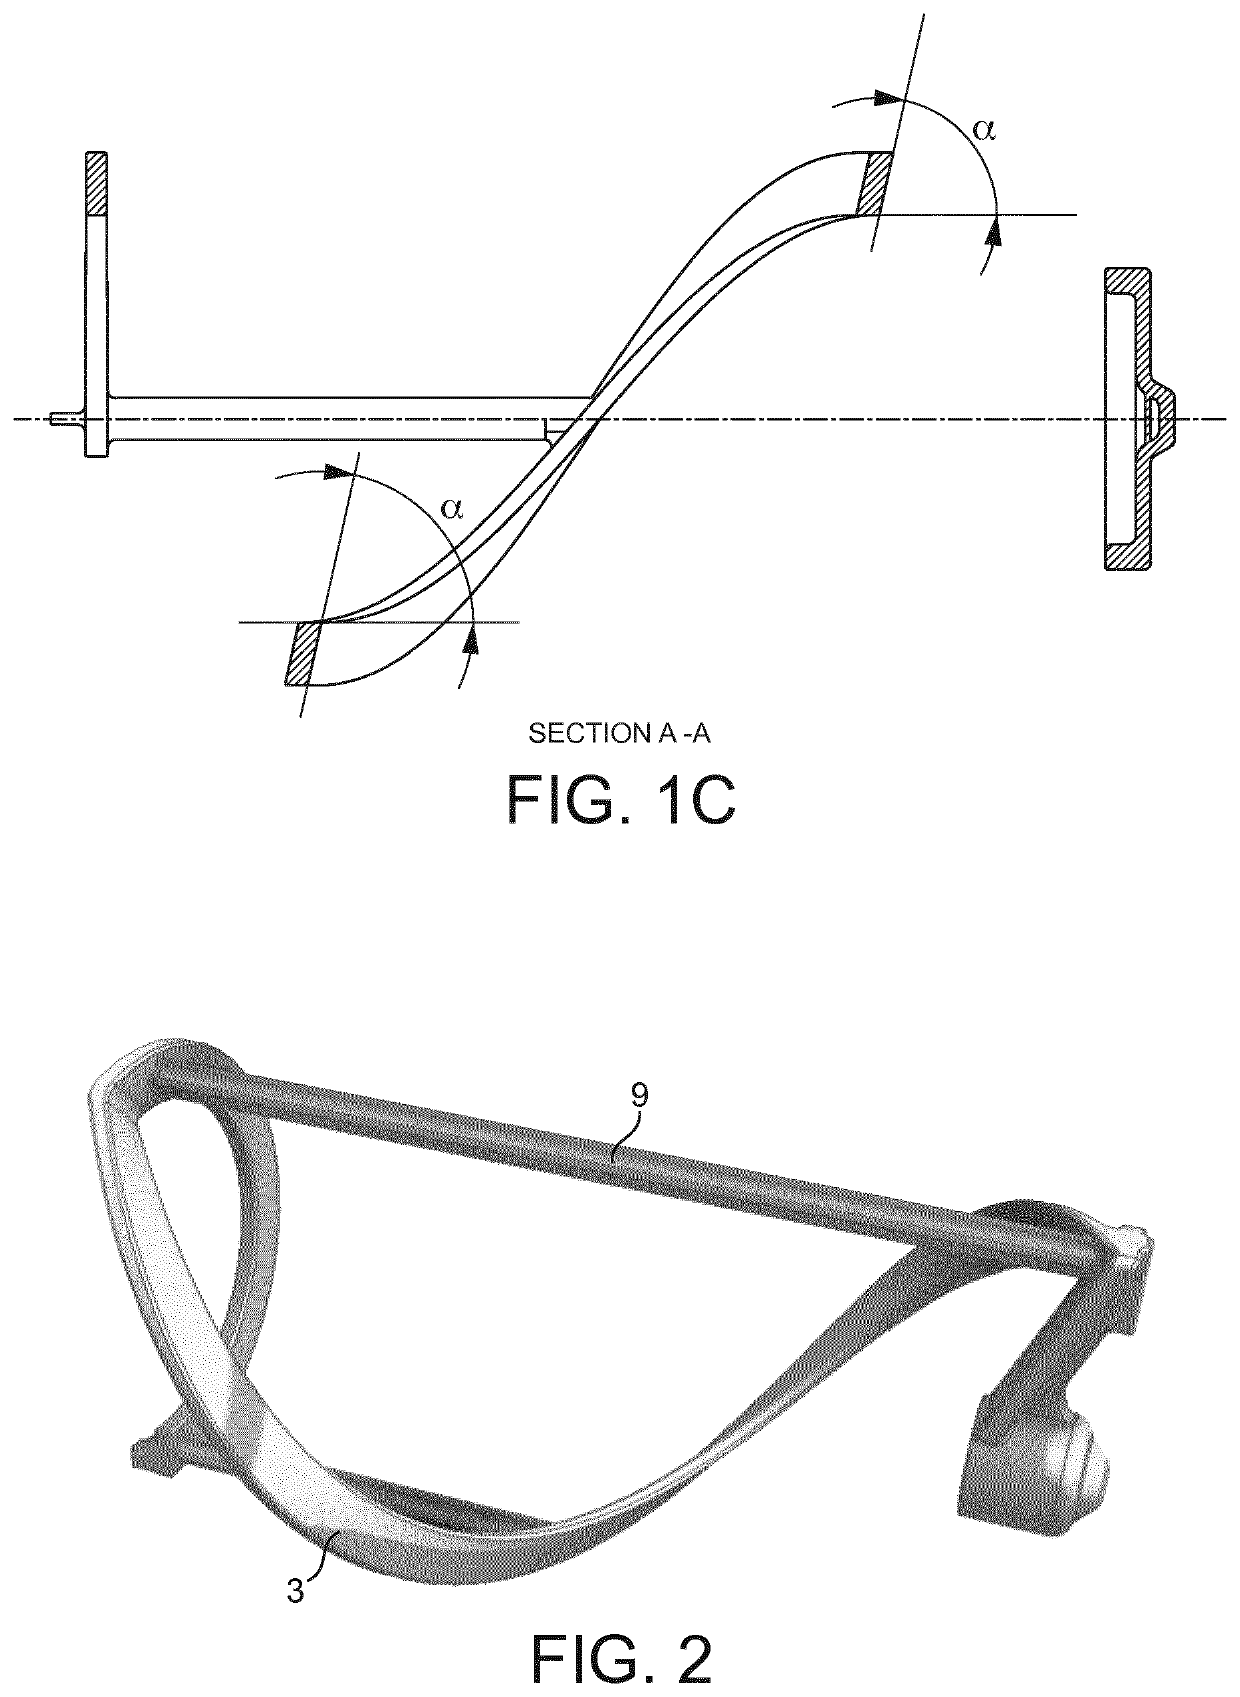 Helical movement device